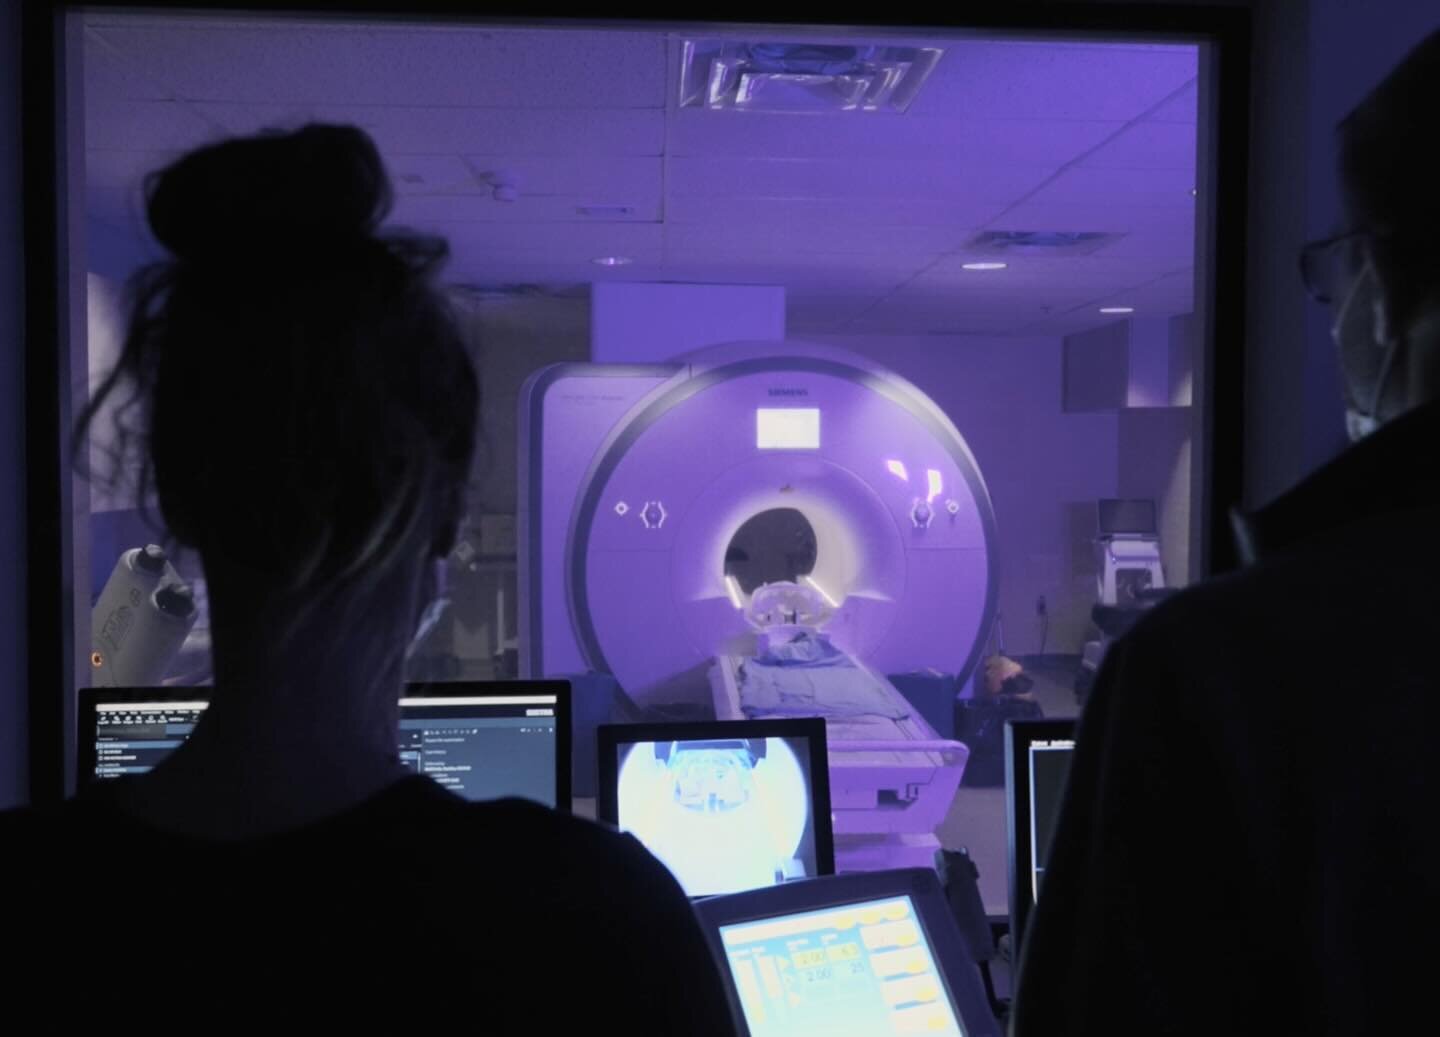 Yeah, I may have painted the MRI Scanner at @quintehealth with a hint of cheerful Lavender. Truly, it reflects the mindset of the incredible health care professionals you&rsquo;ll meet in our region. Here&rsquo;s a selection of shots from the compell